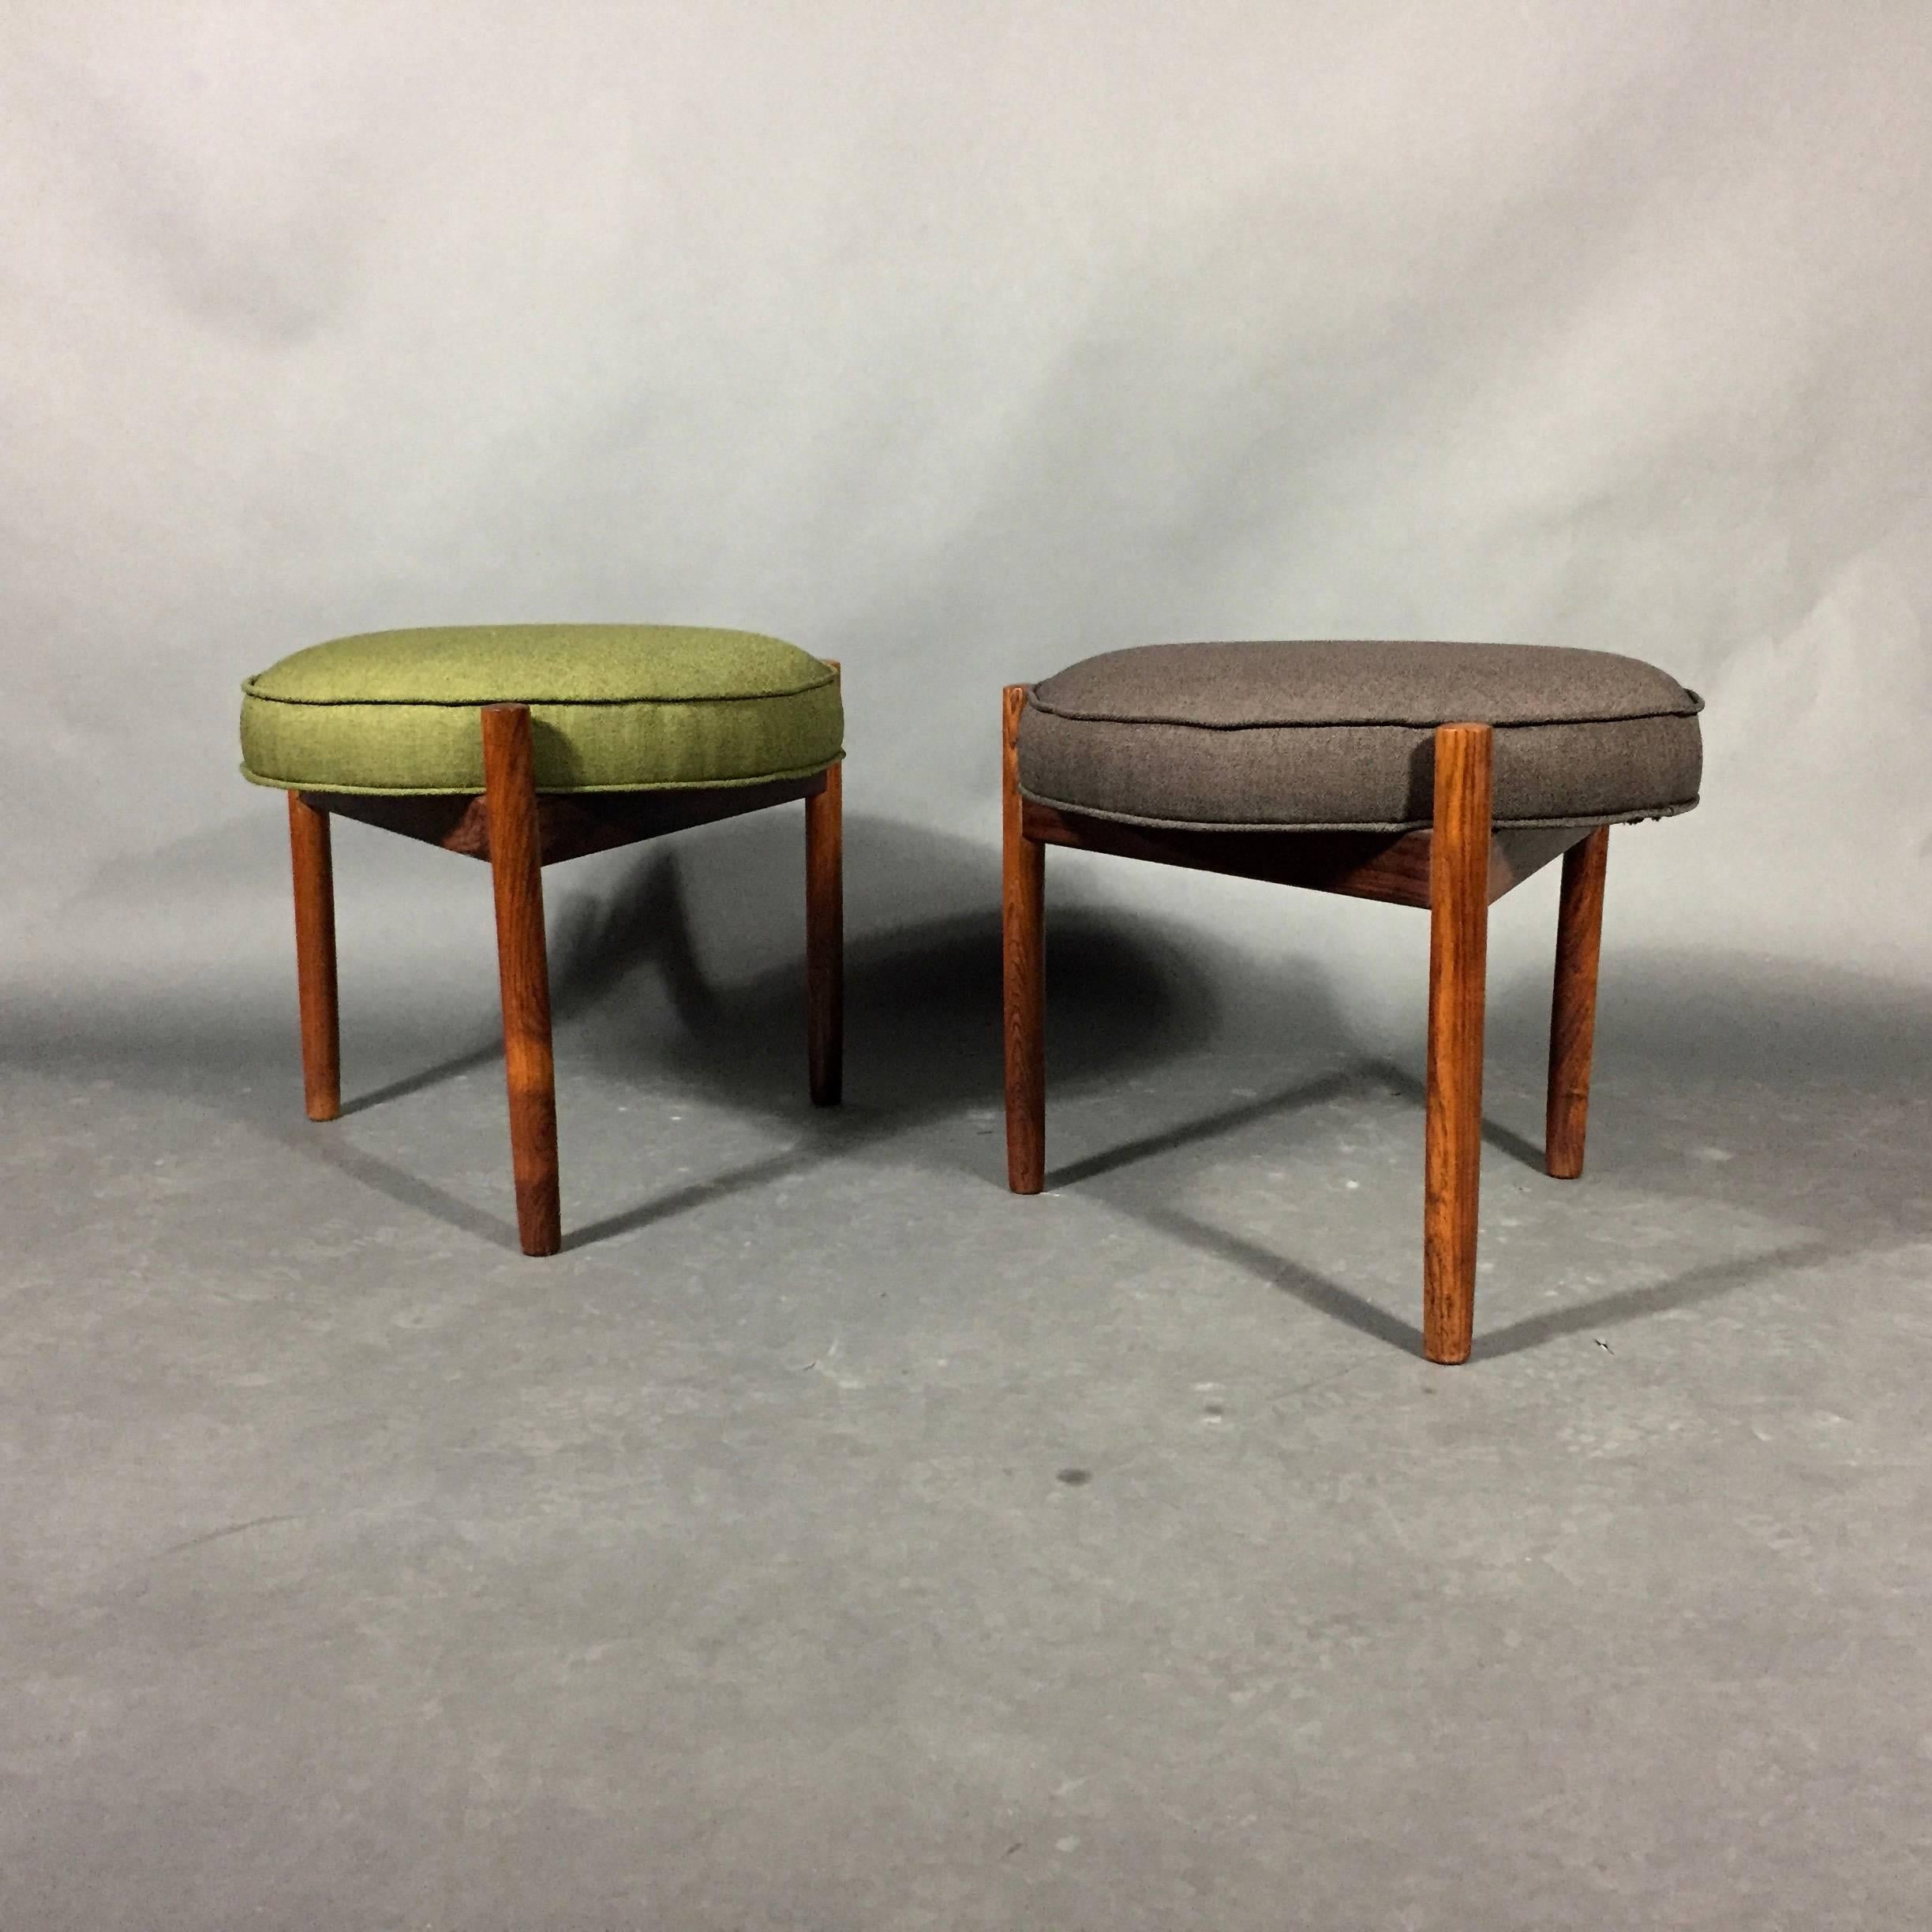 This gorgeous Scandinavian modern rosewood pair of three-leg stools by Spøttrup Møbelfabrik are recently updated with a chic Danish fabric that perfectly captures the era, 1960s.